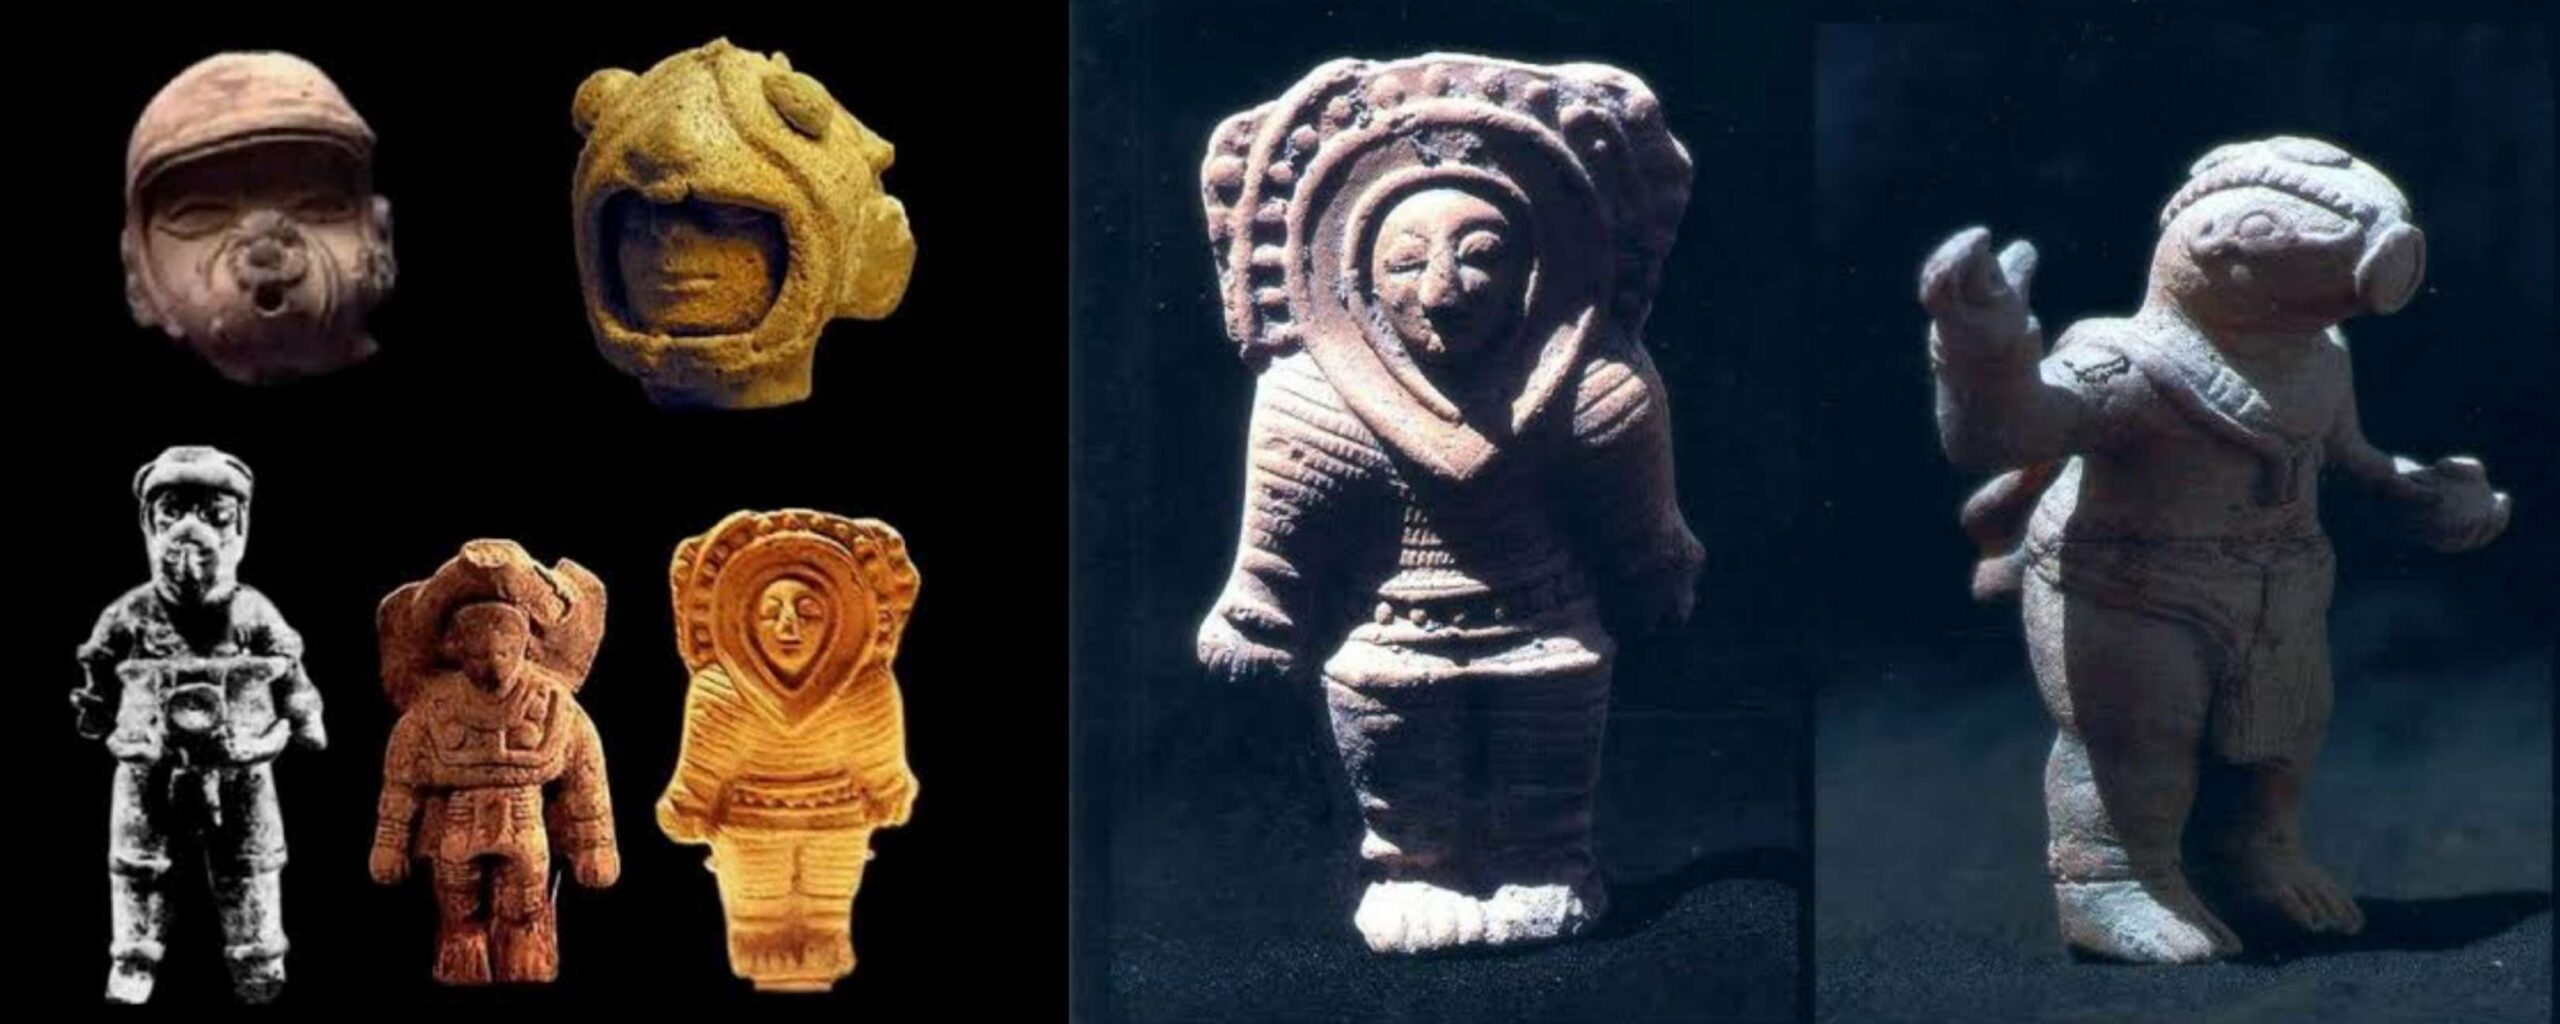 Were the Mayans visited by ancient astronauts? 3